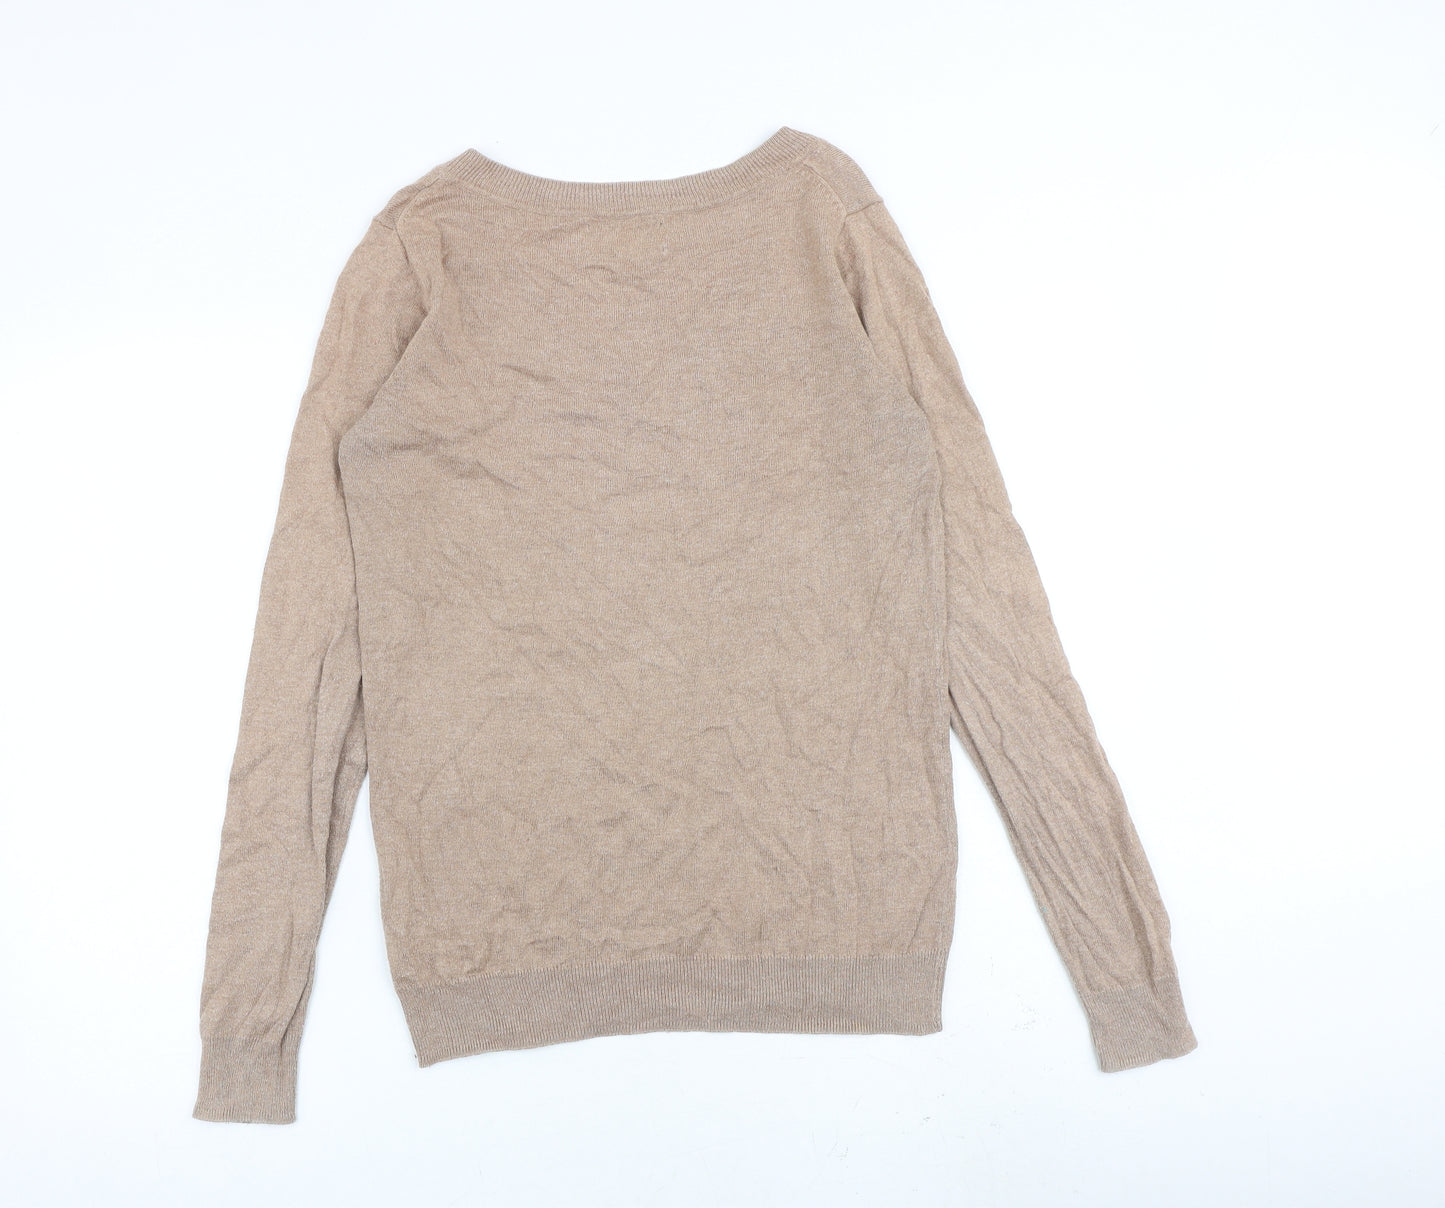 Joules Womens Beige V-Neck Cotton Pullover Jumper Size 10